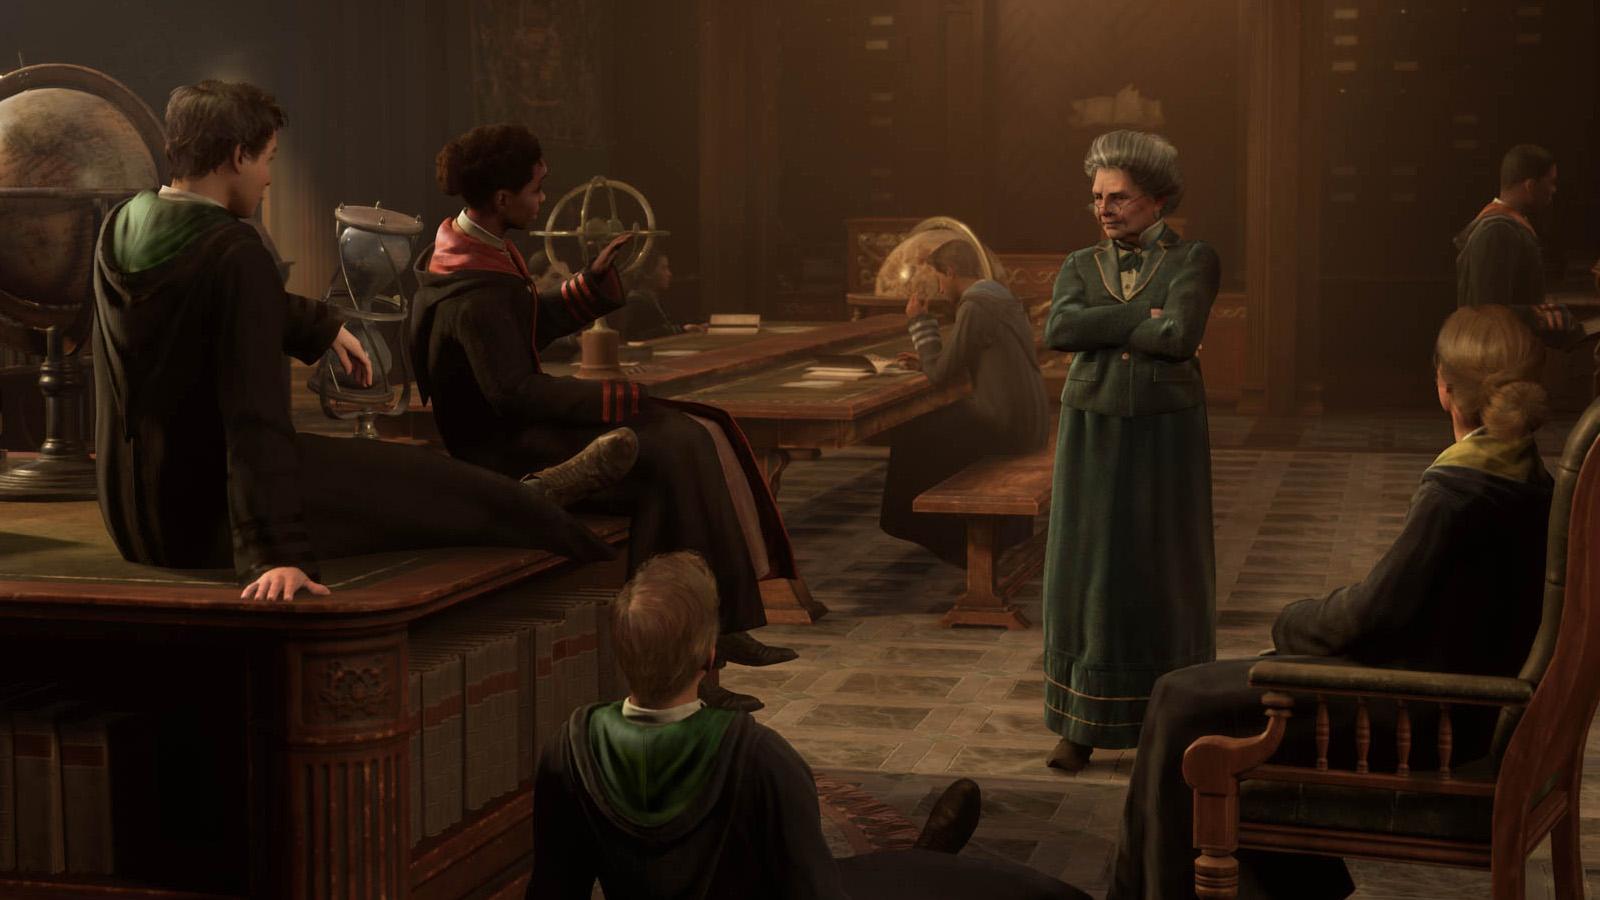 Hogwarts Legacy System Requirements - The Tech Edvocate